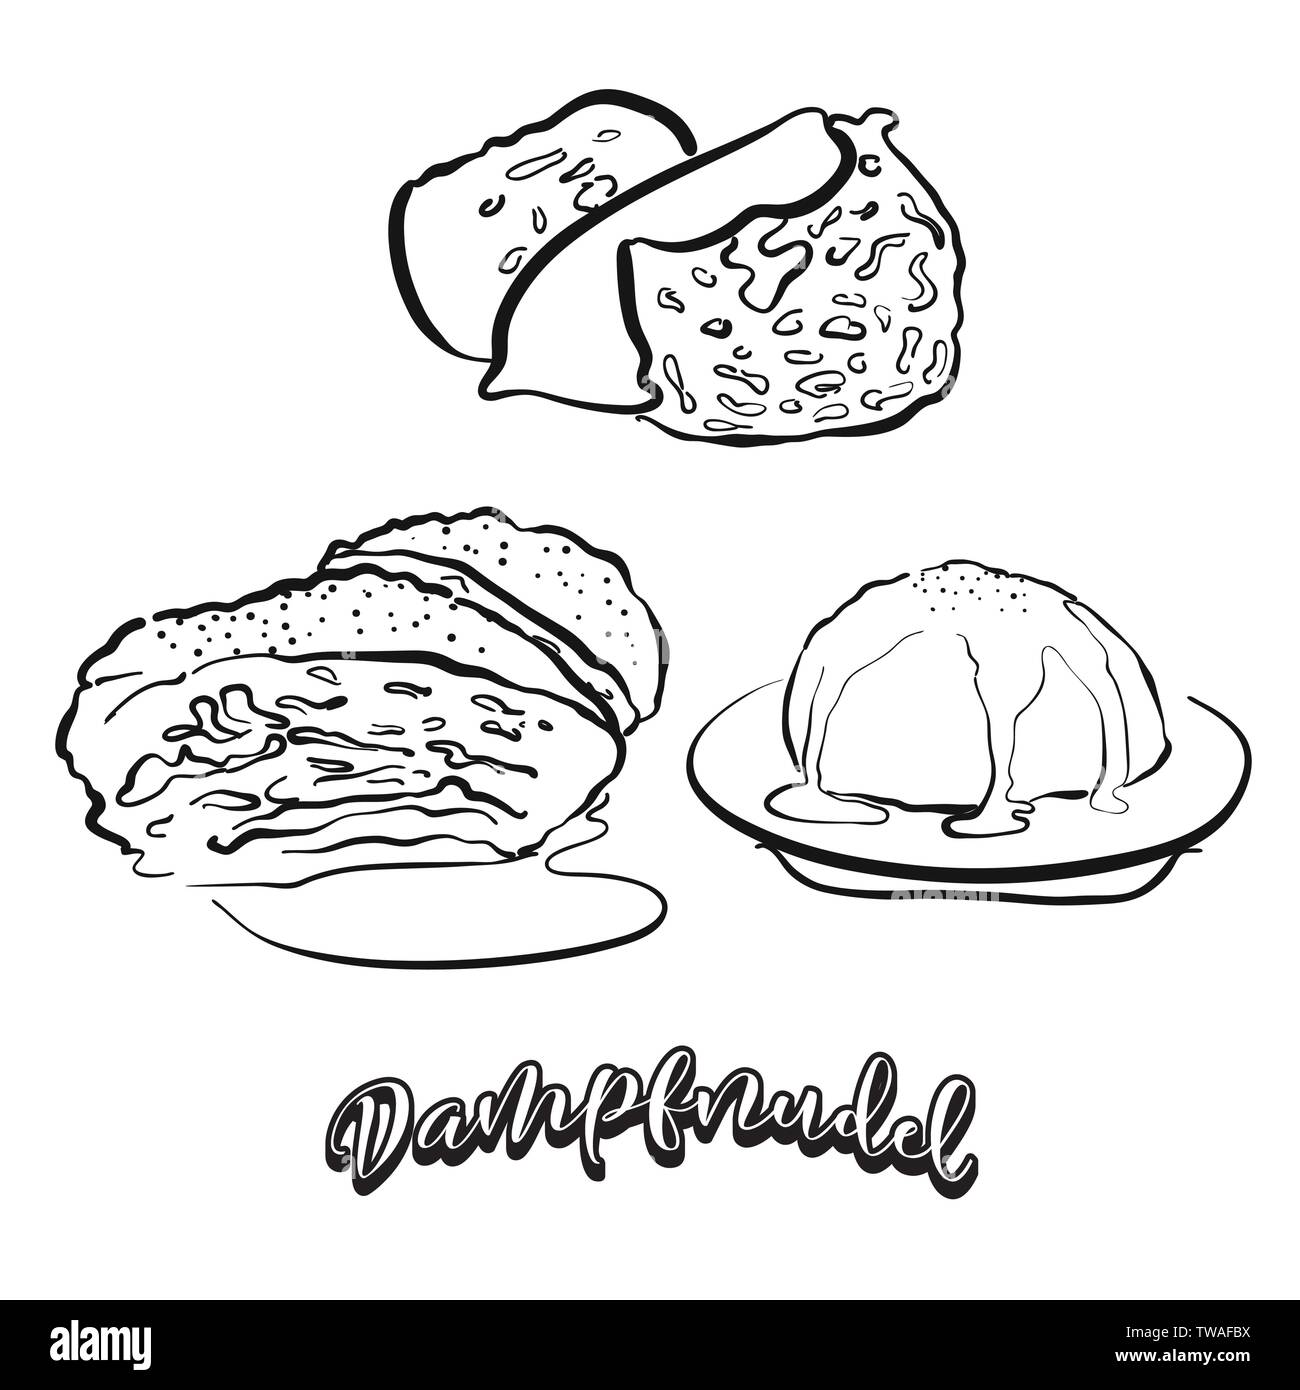 Dampfnudel food sketch on chalkboard. Vector drawing of Sweet bread, usually known in Germany. Food illustration series. Stock Vector